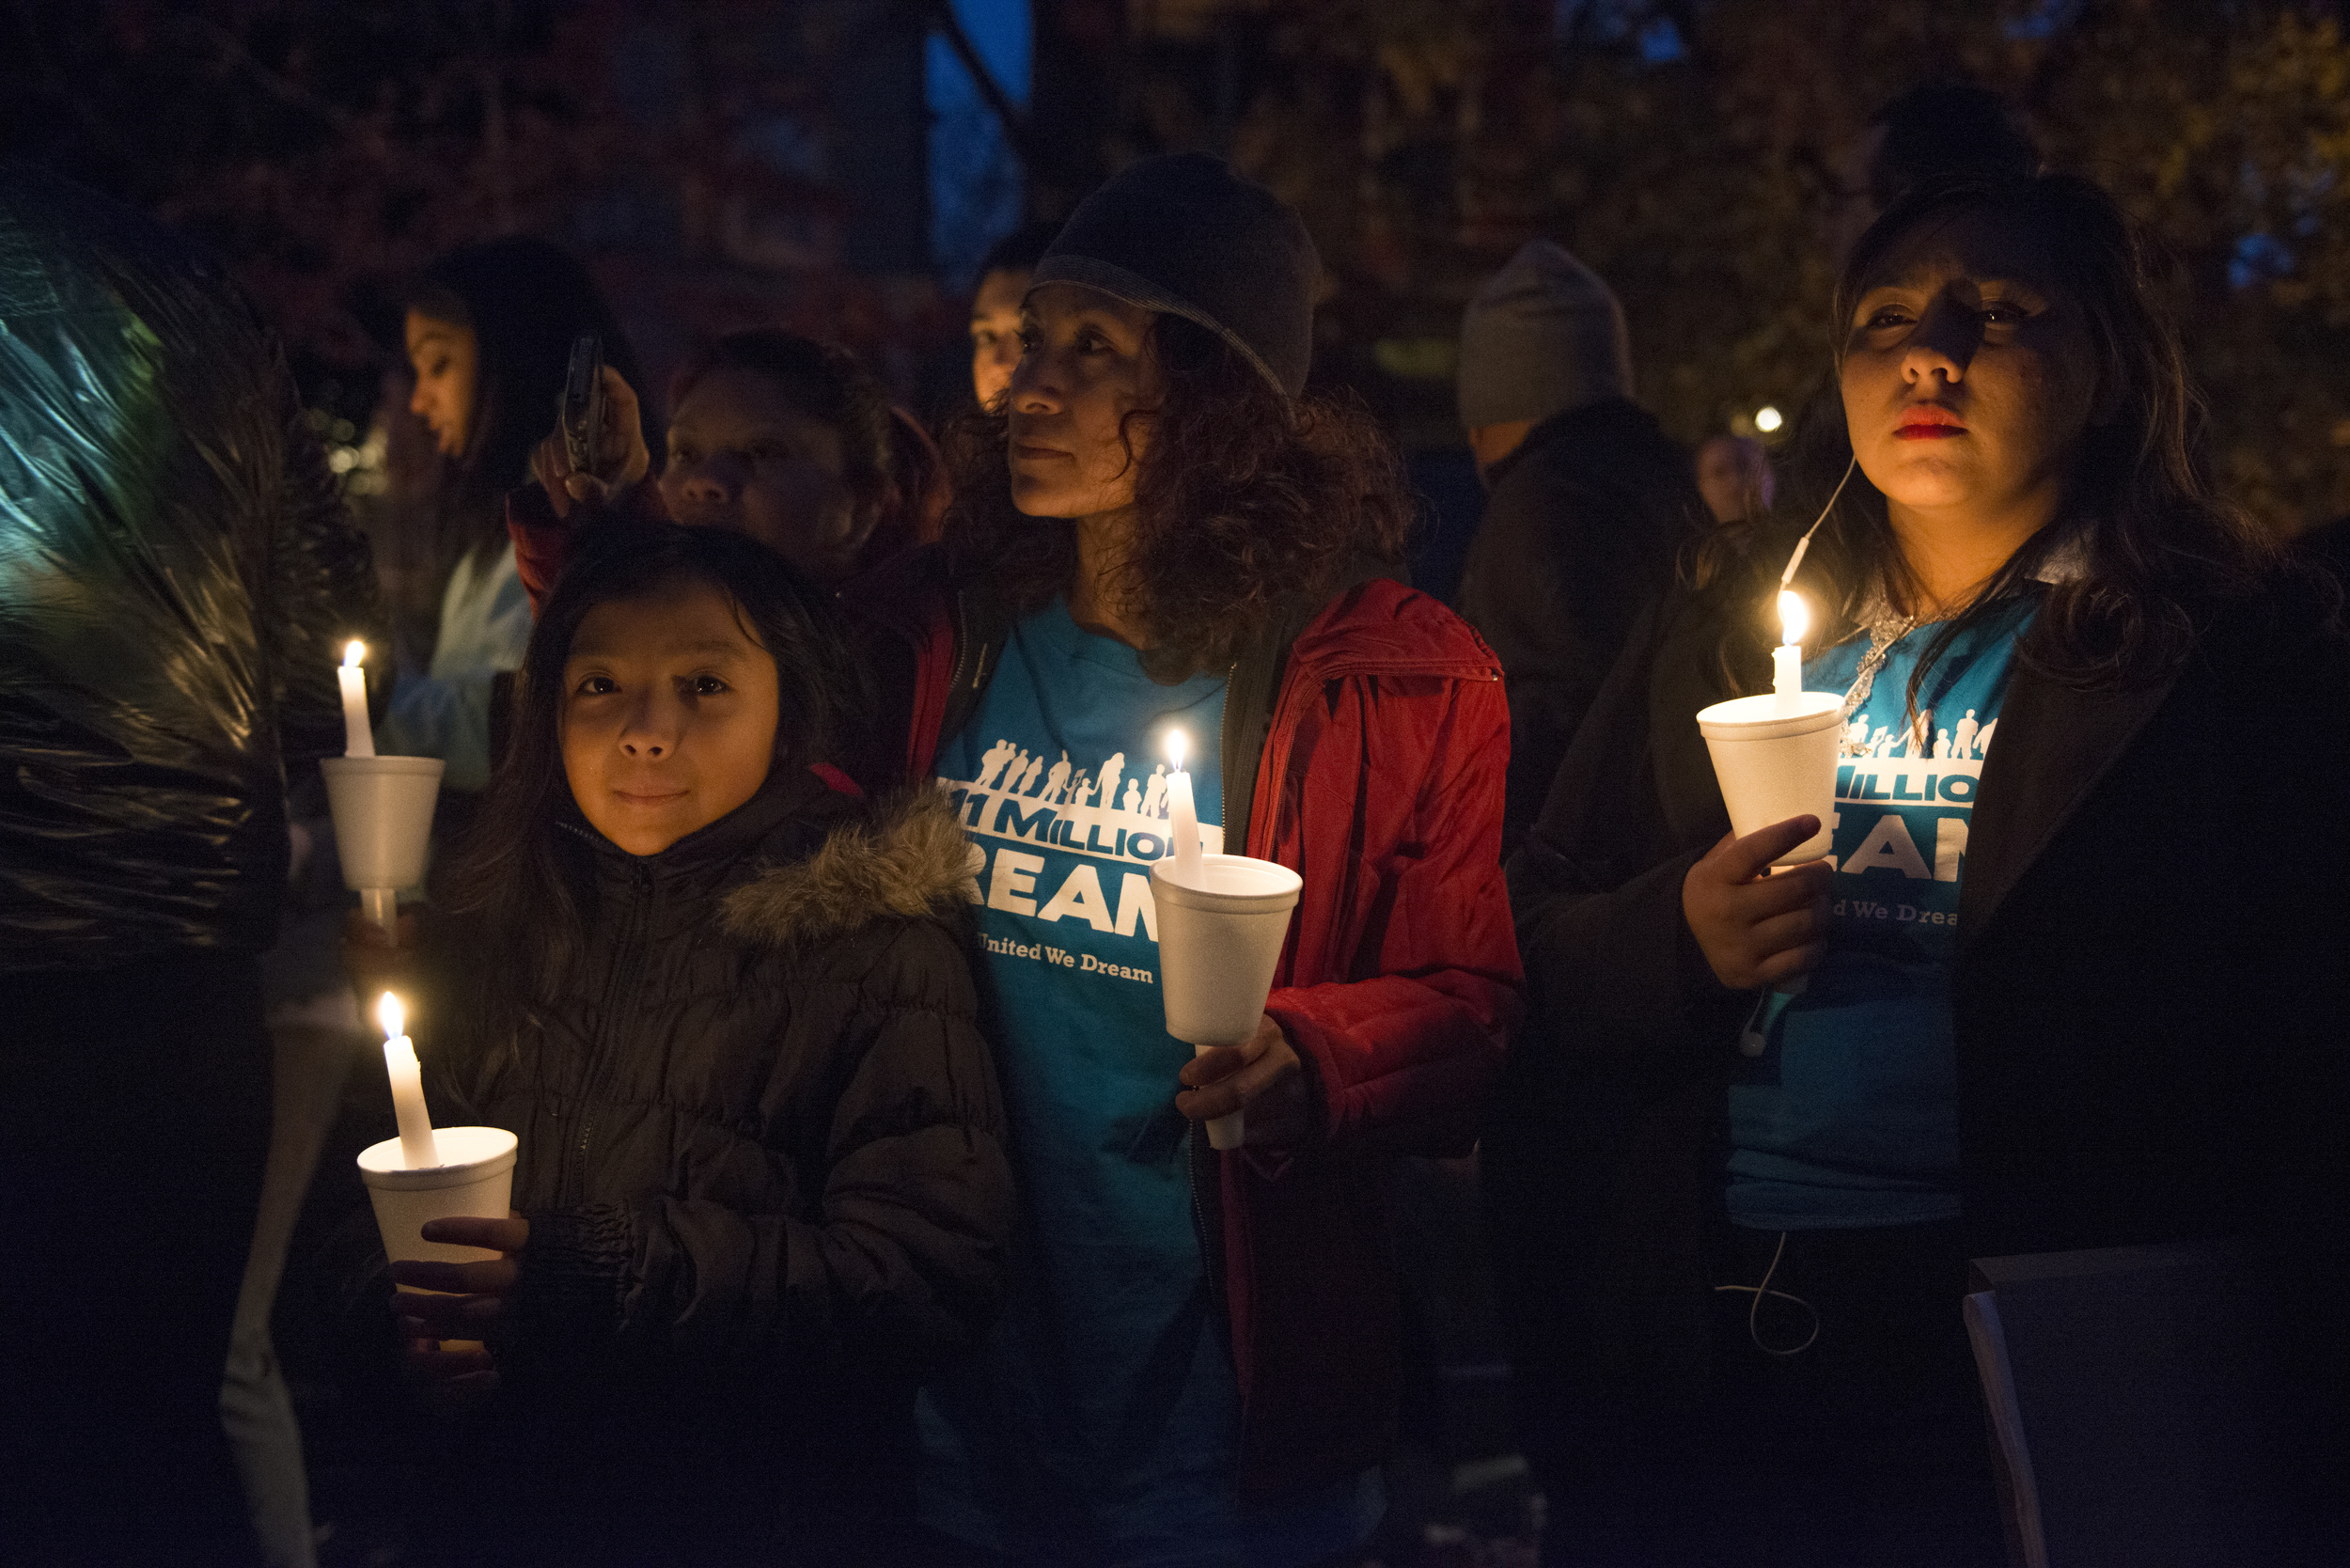   Evelia Gonzalez and daughter Sara participate in a candle light vigil outside of Speaker of House John Boehner's residence in Washington, DC., on November 20th. Members of the group Dreamers, mostly of hispanic students hold a candle light vigil ou